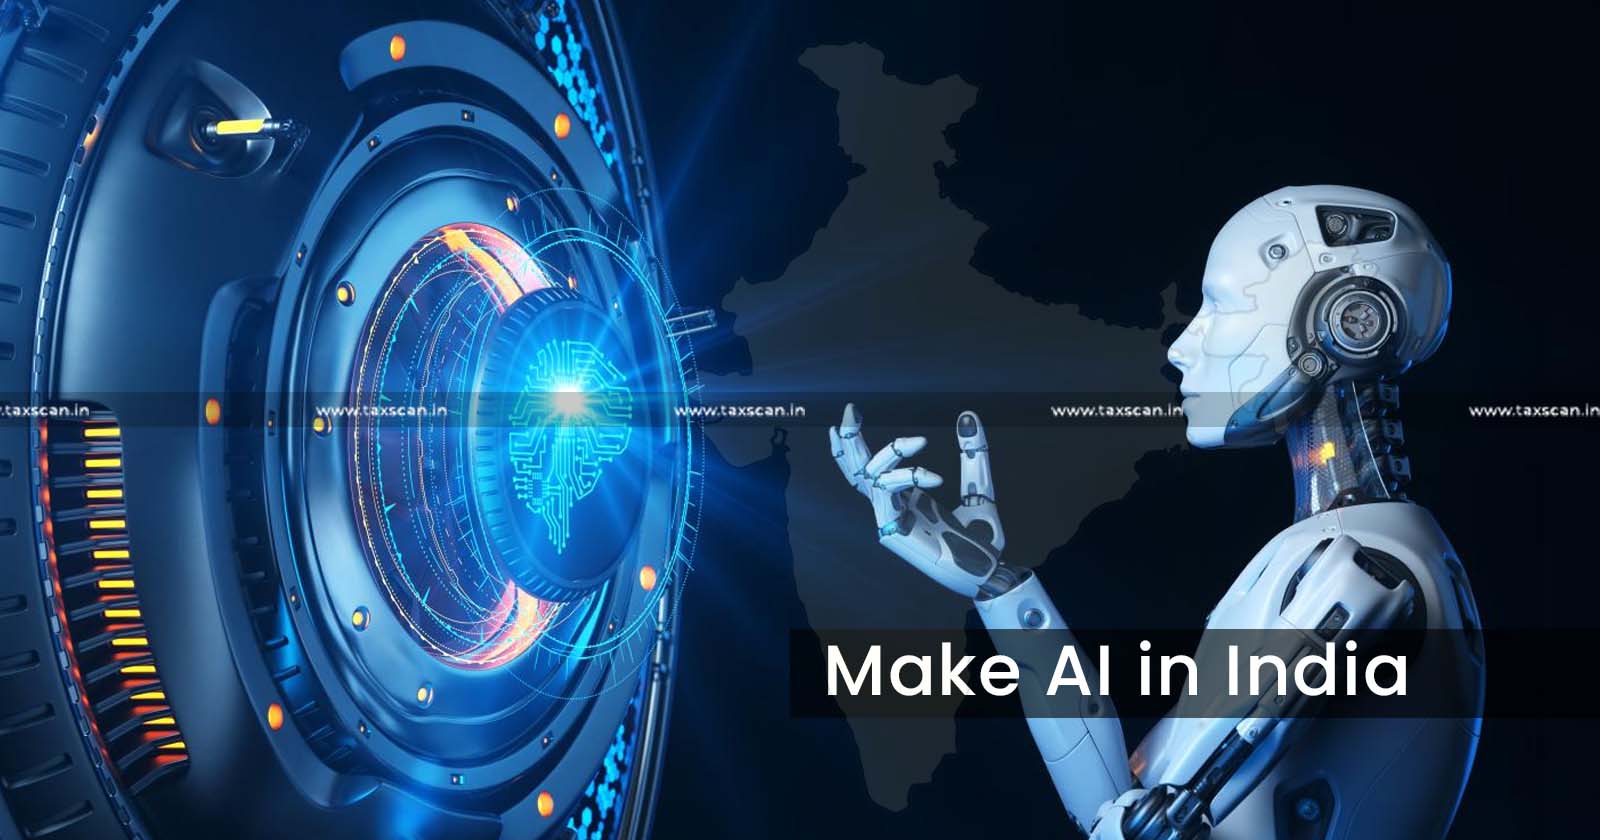 budget 2023 - Make AI in India - Centres of Excellence - budget 2023 live - union budget 2023 - nirmala sitharaman budget - nirmala sitharaman union budget - nirmala sitharaman - budget 2023 india - Taxscan